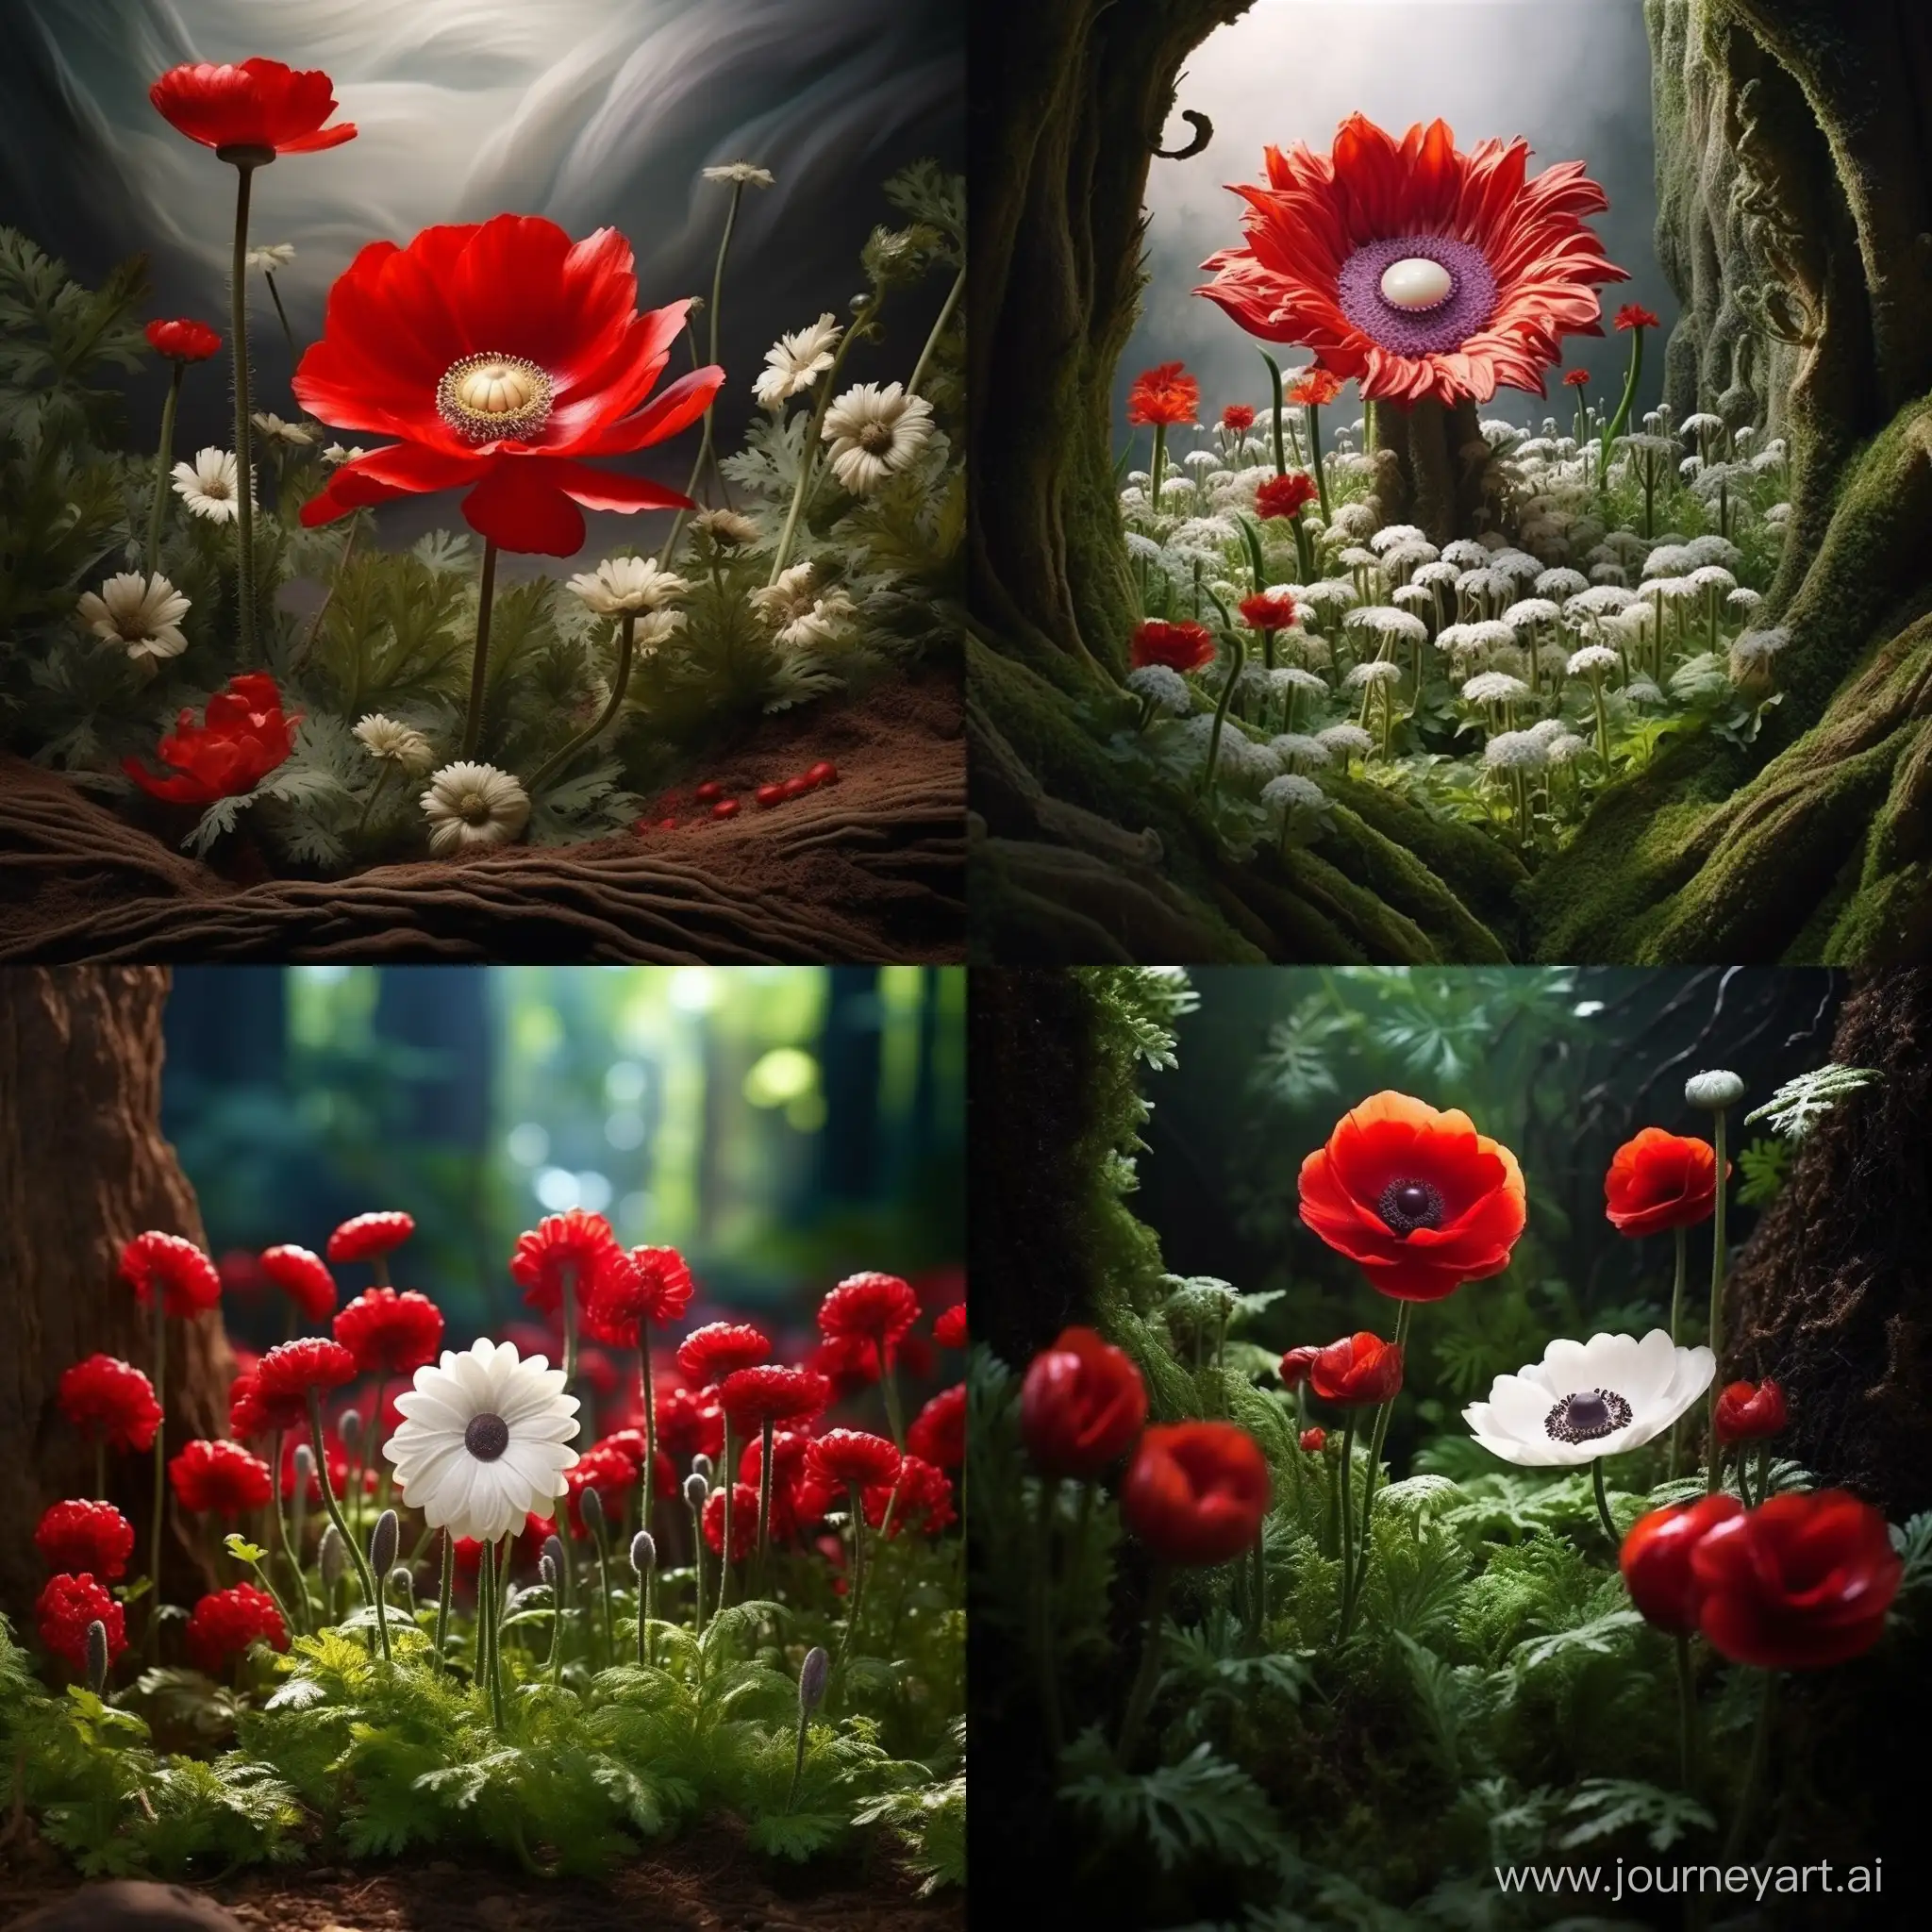 create this: one big red anemone coming growing from ground, there is little and not fully frown red anemones near it, there is also some grass that as it goes further from he big anemone the go less and less. the ground is completly white, the angel of the picture is from above